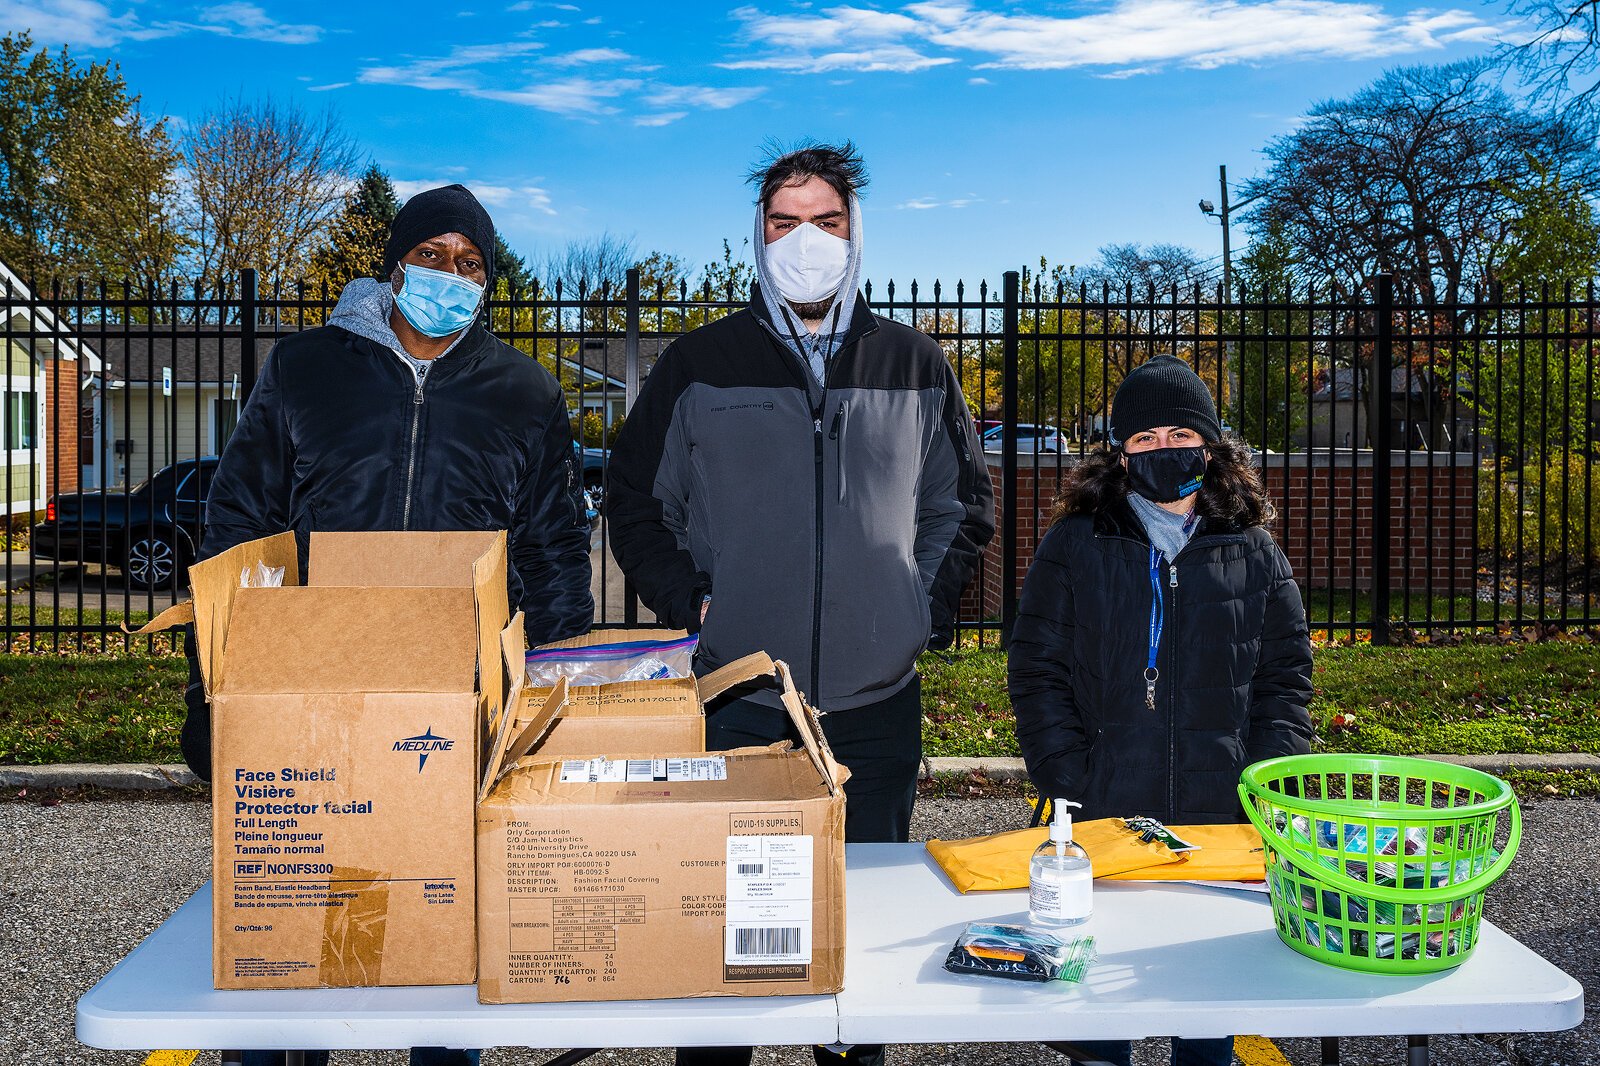 Charles Wilson, Renato Quelhas, and Briana Tetsch hand out free cleaning supplies and masks at a flu shot drive-through/walk-up event in the Washtenaw County Health Department parking lot in Ypsilanti.